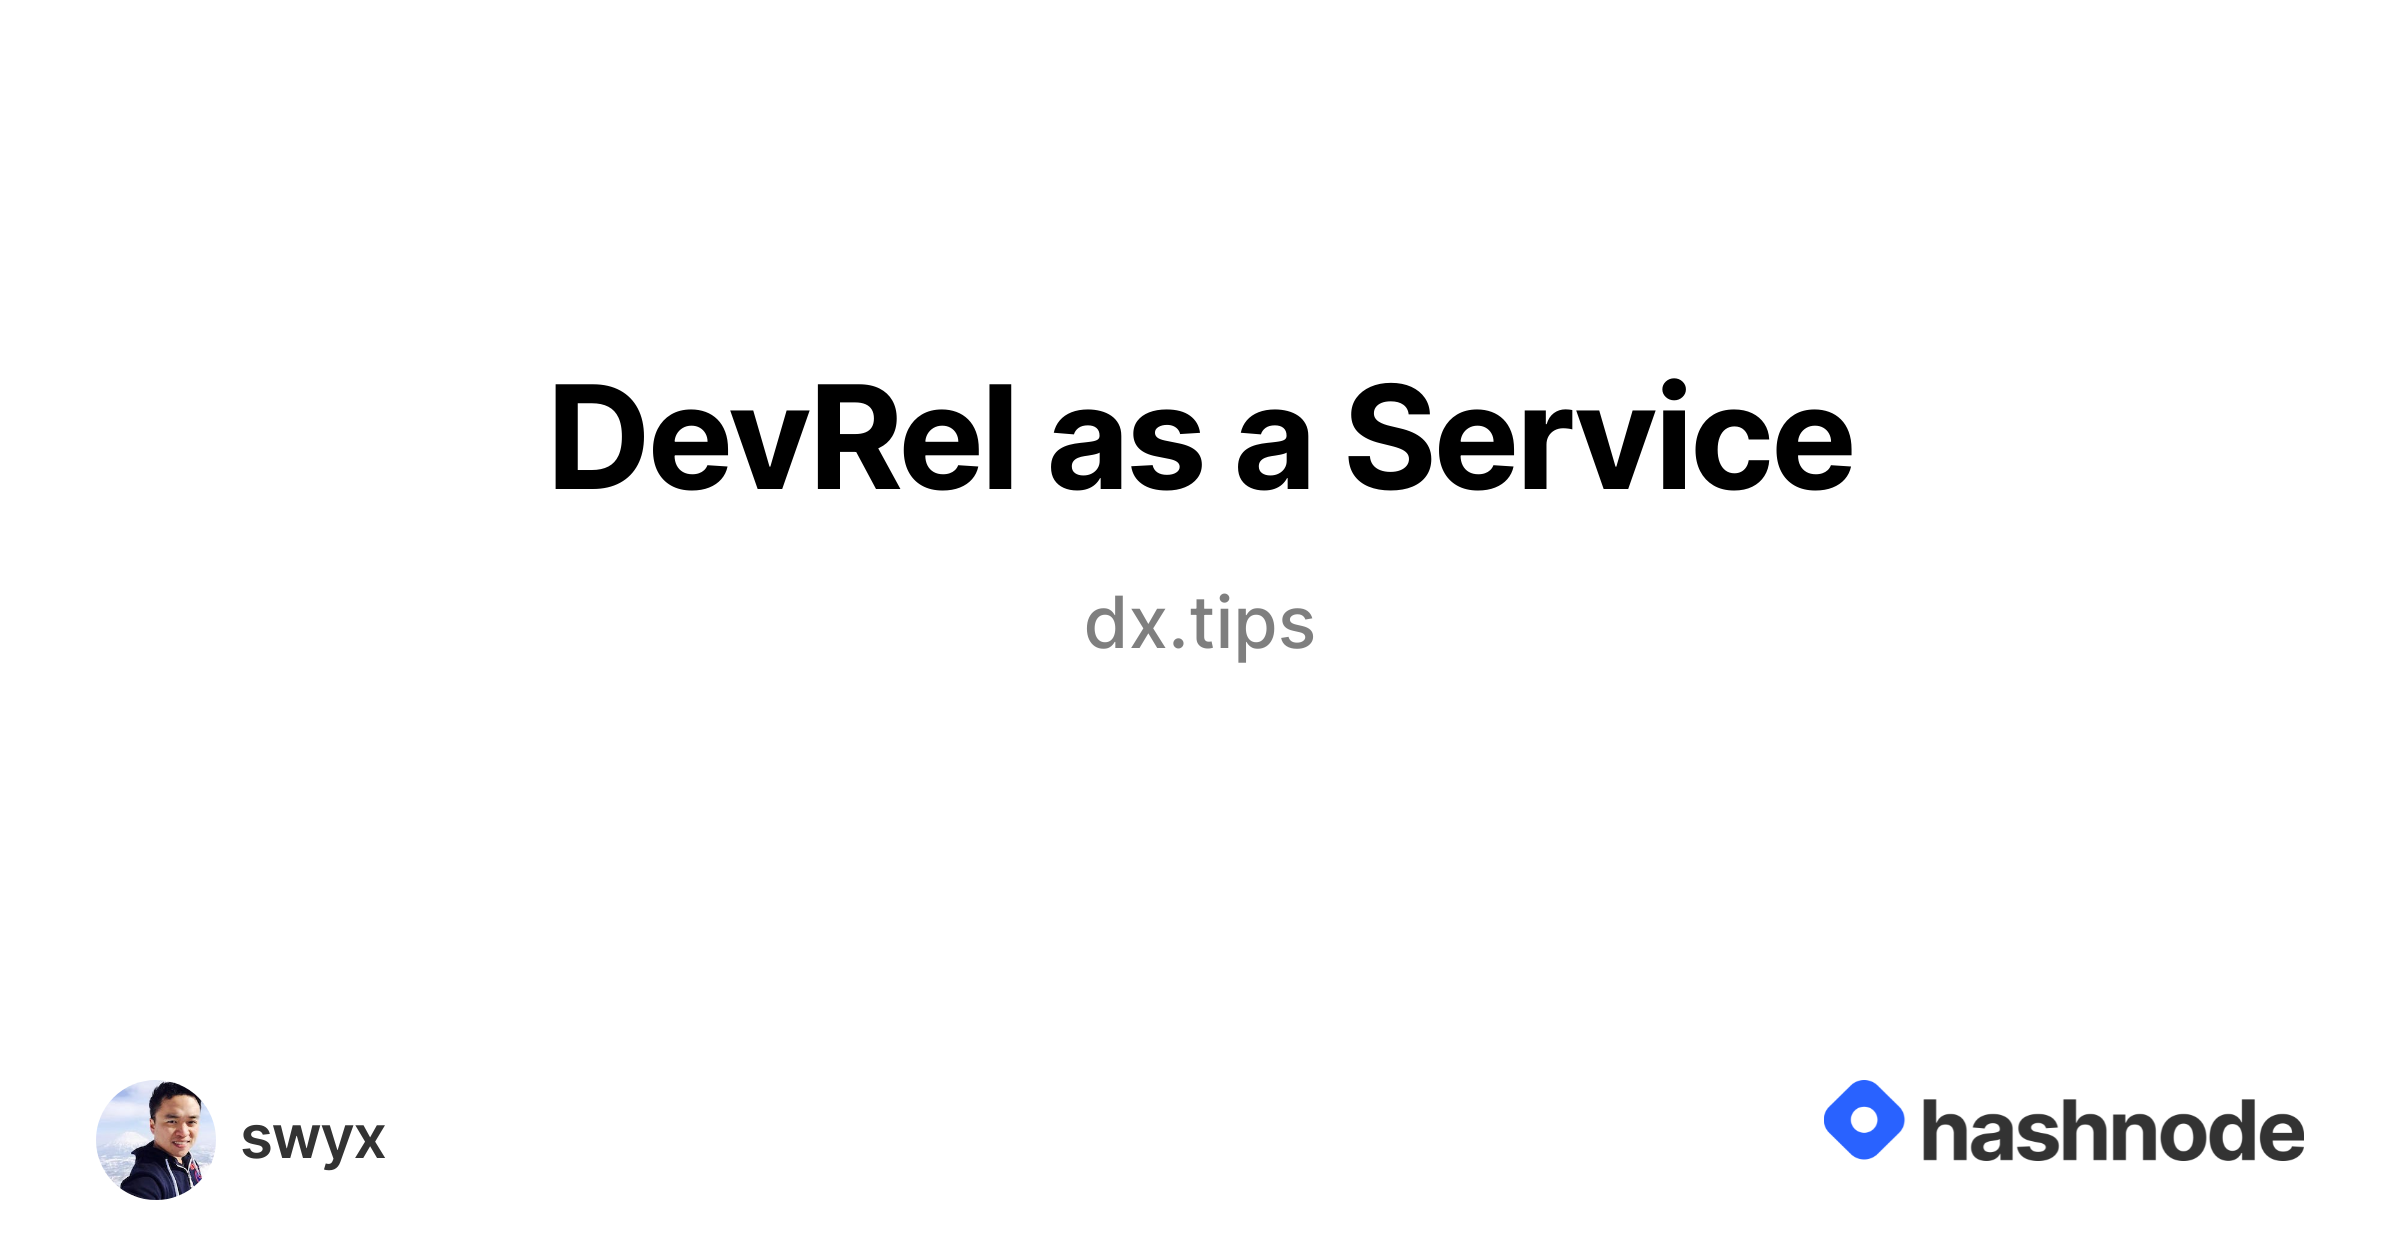 One of my favorite jokes about DevRel is that the First Commandment of DevRel seems to be, upon getting the job, you must then immediately turn around